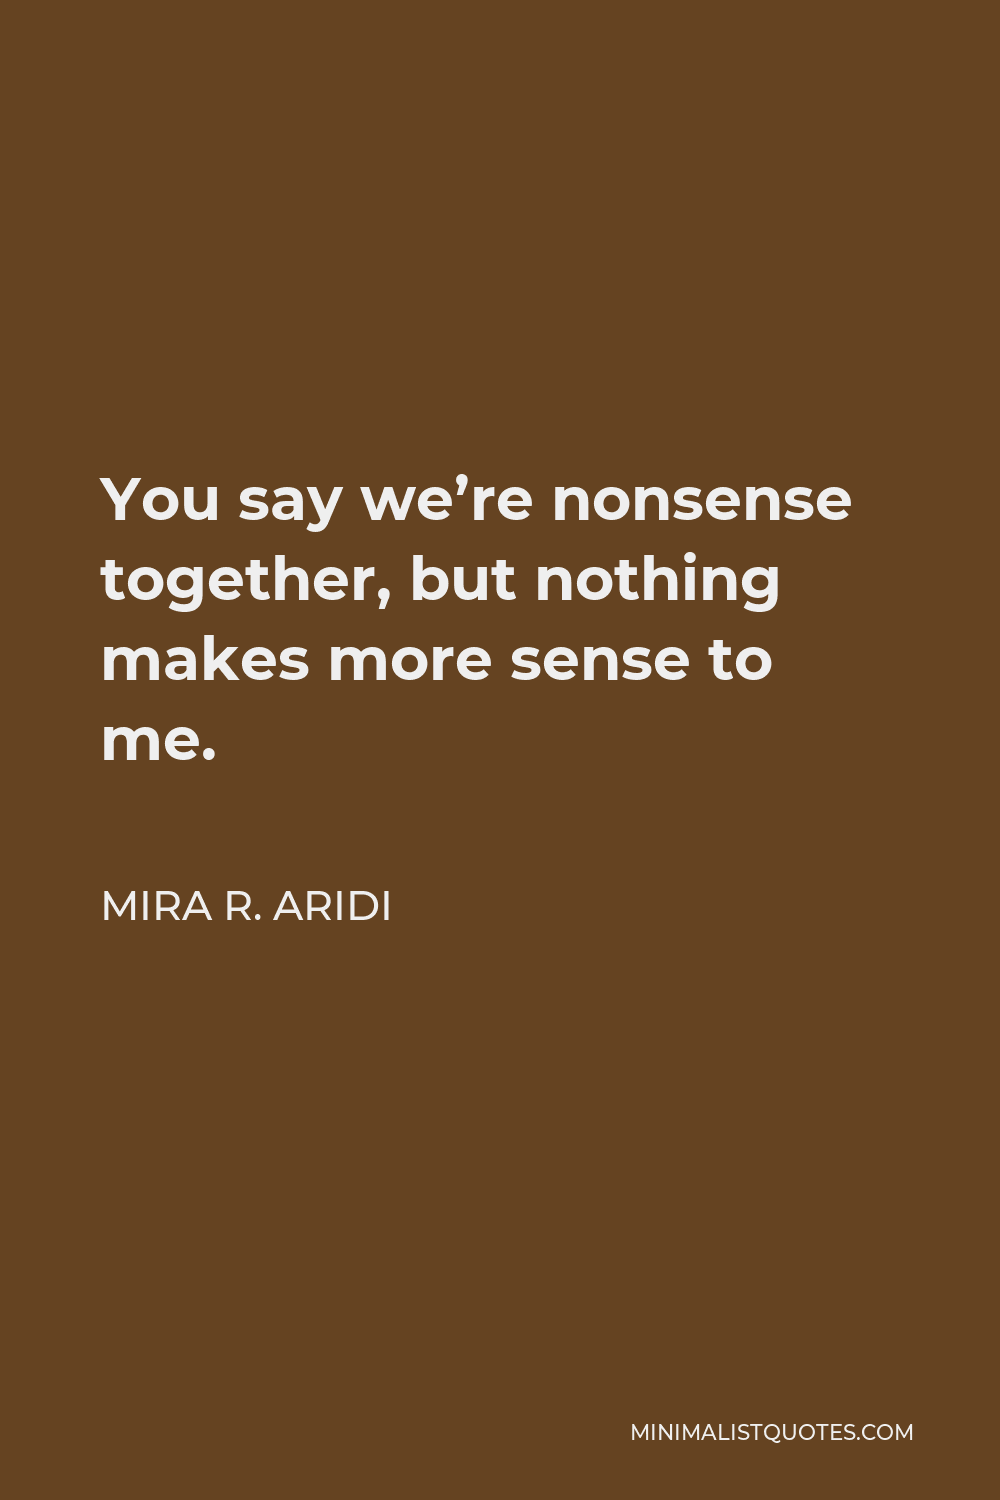 Mira R. Aridi Quote - You say we’re nonsense together, but nothing makes more sense to me.